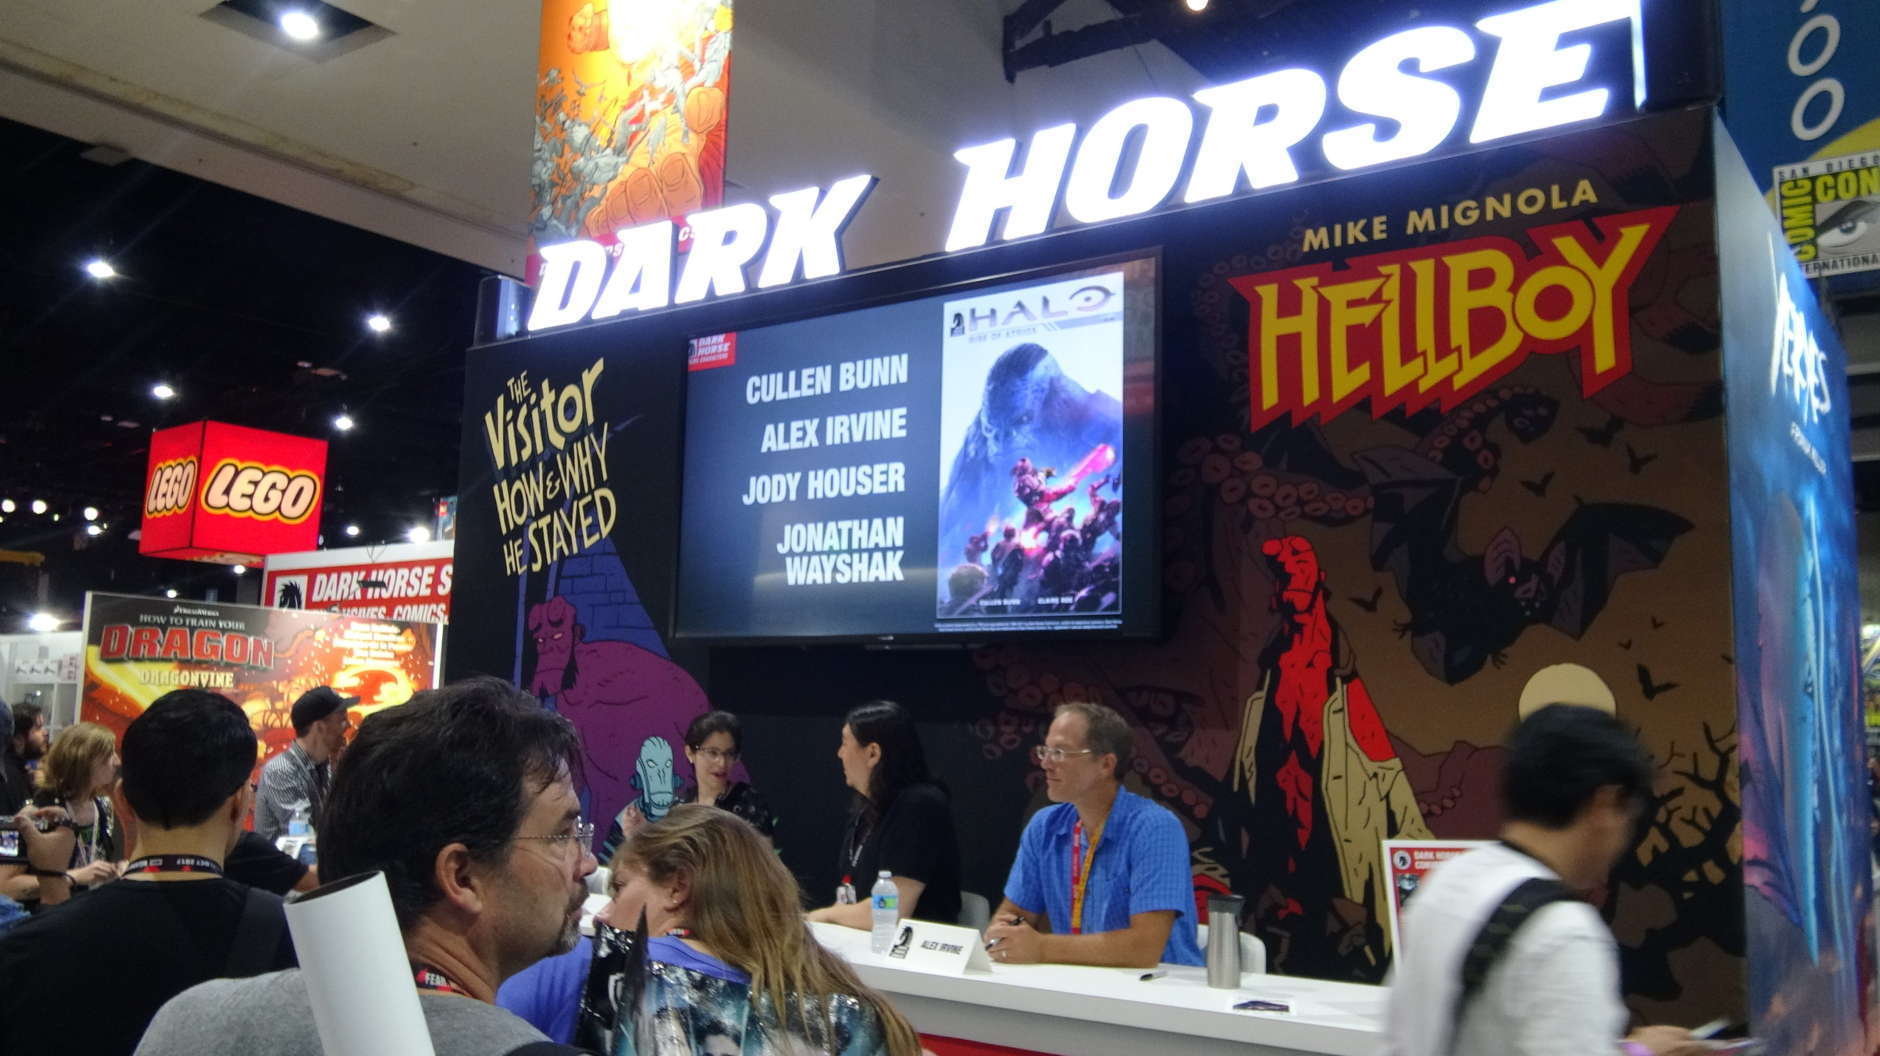 Fans line up at the Dark Horse comics table at Comic-Con in San Diego. (Courtesy Kenny Fried)